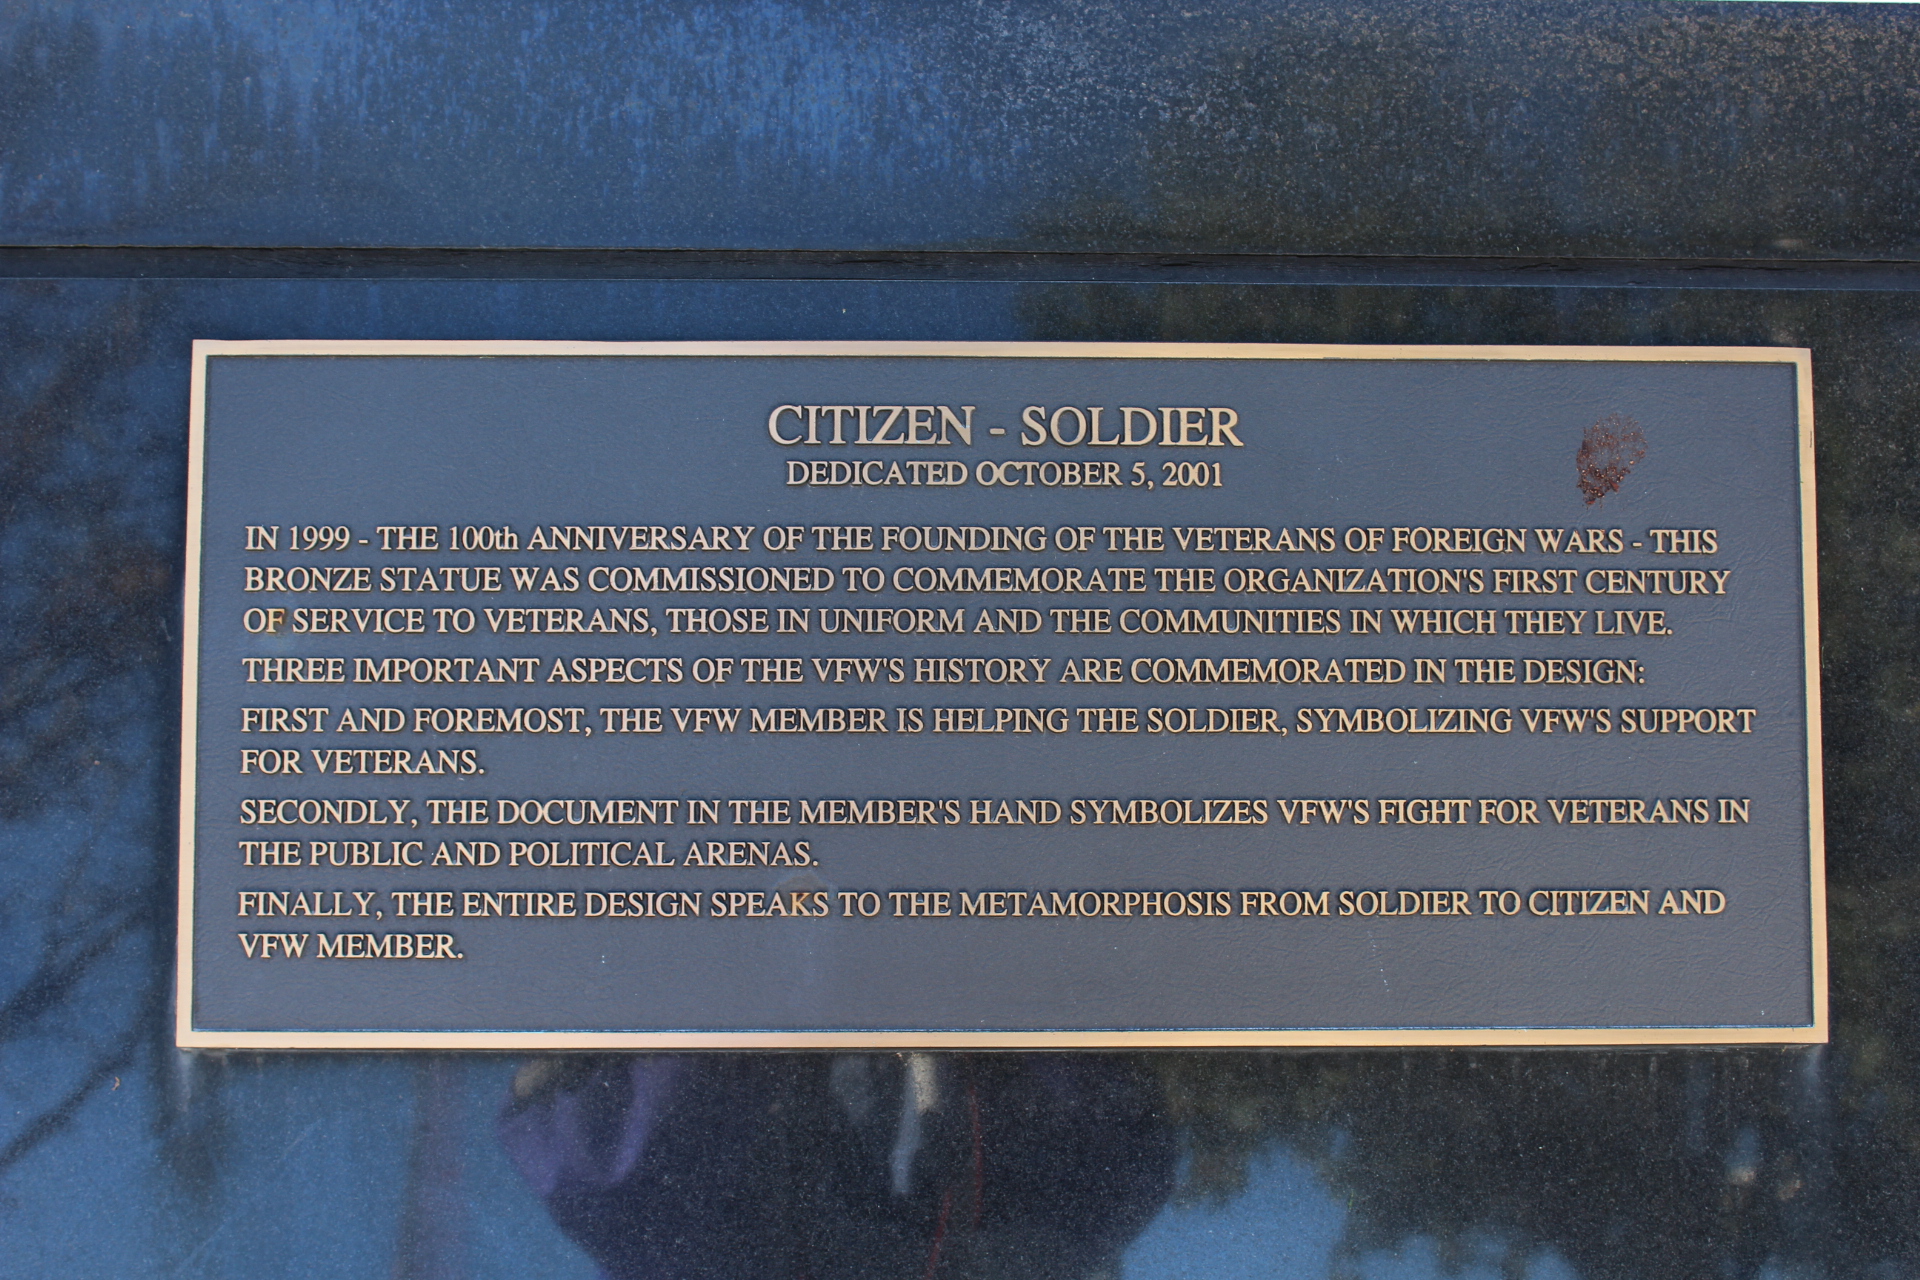 This is the plaque that is under the statue